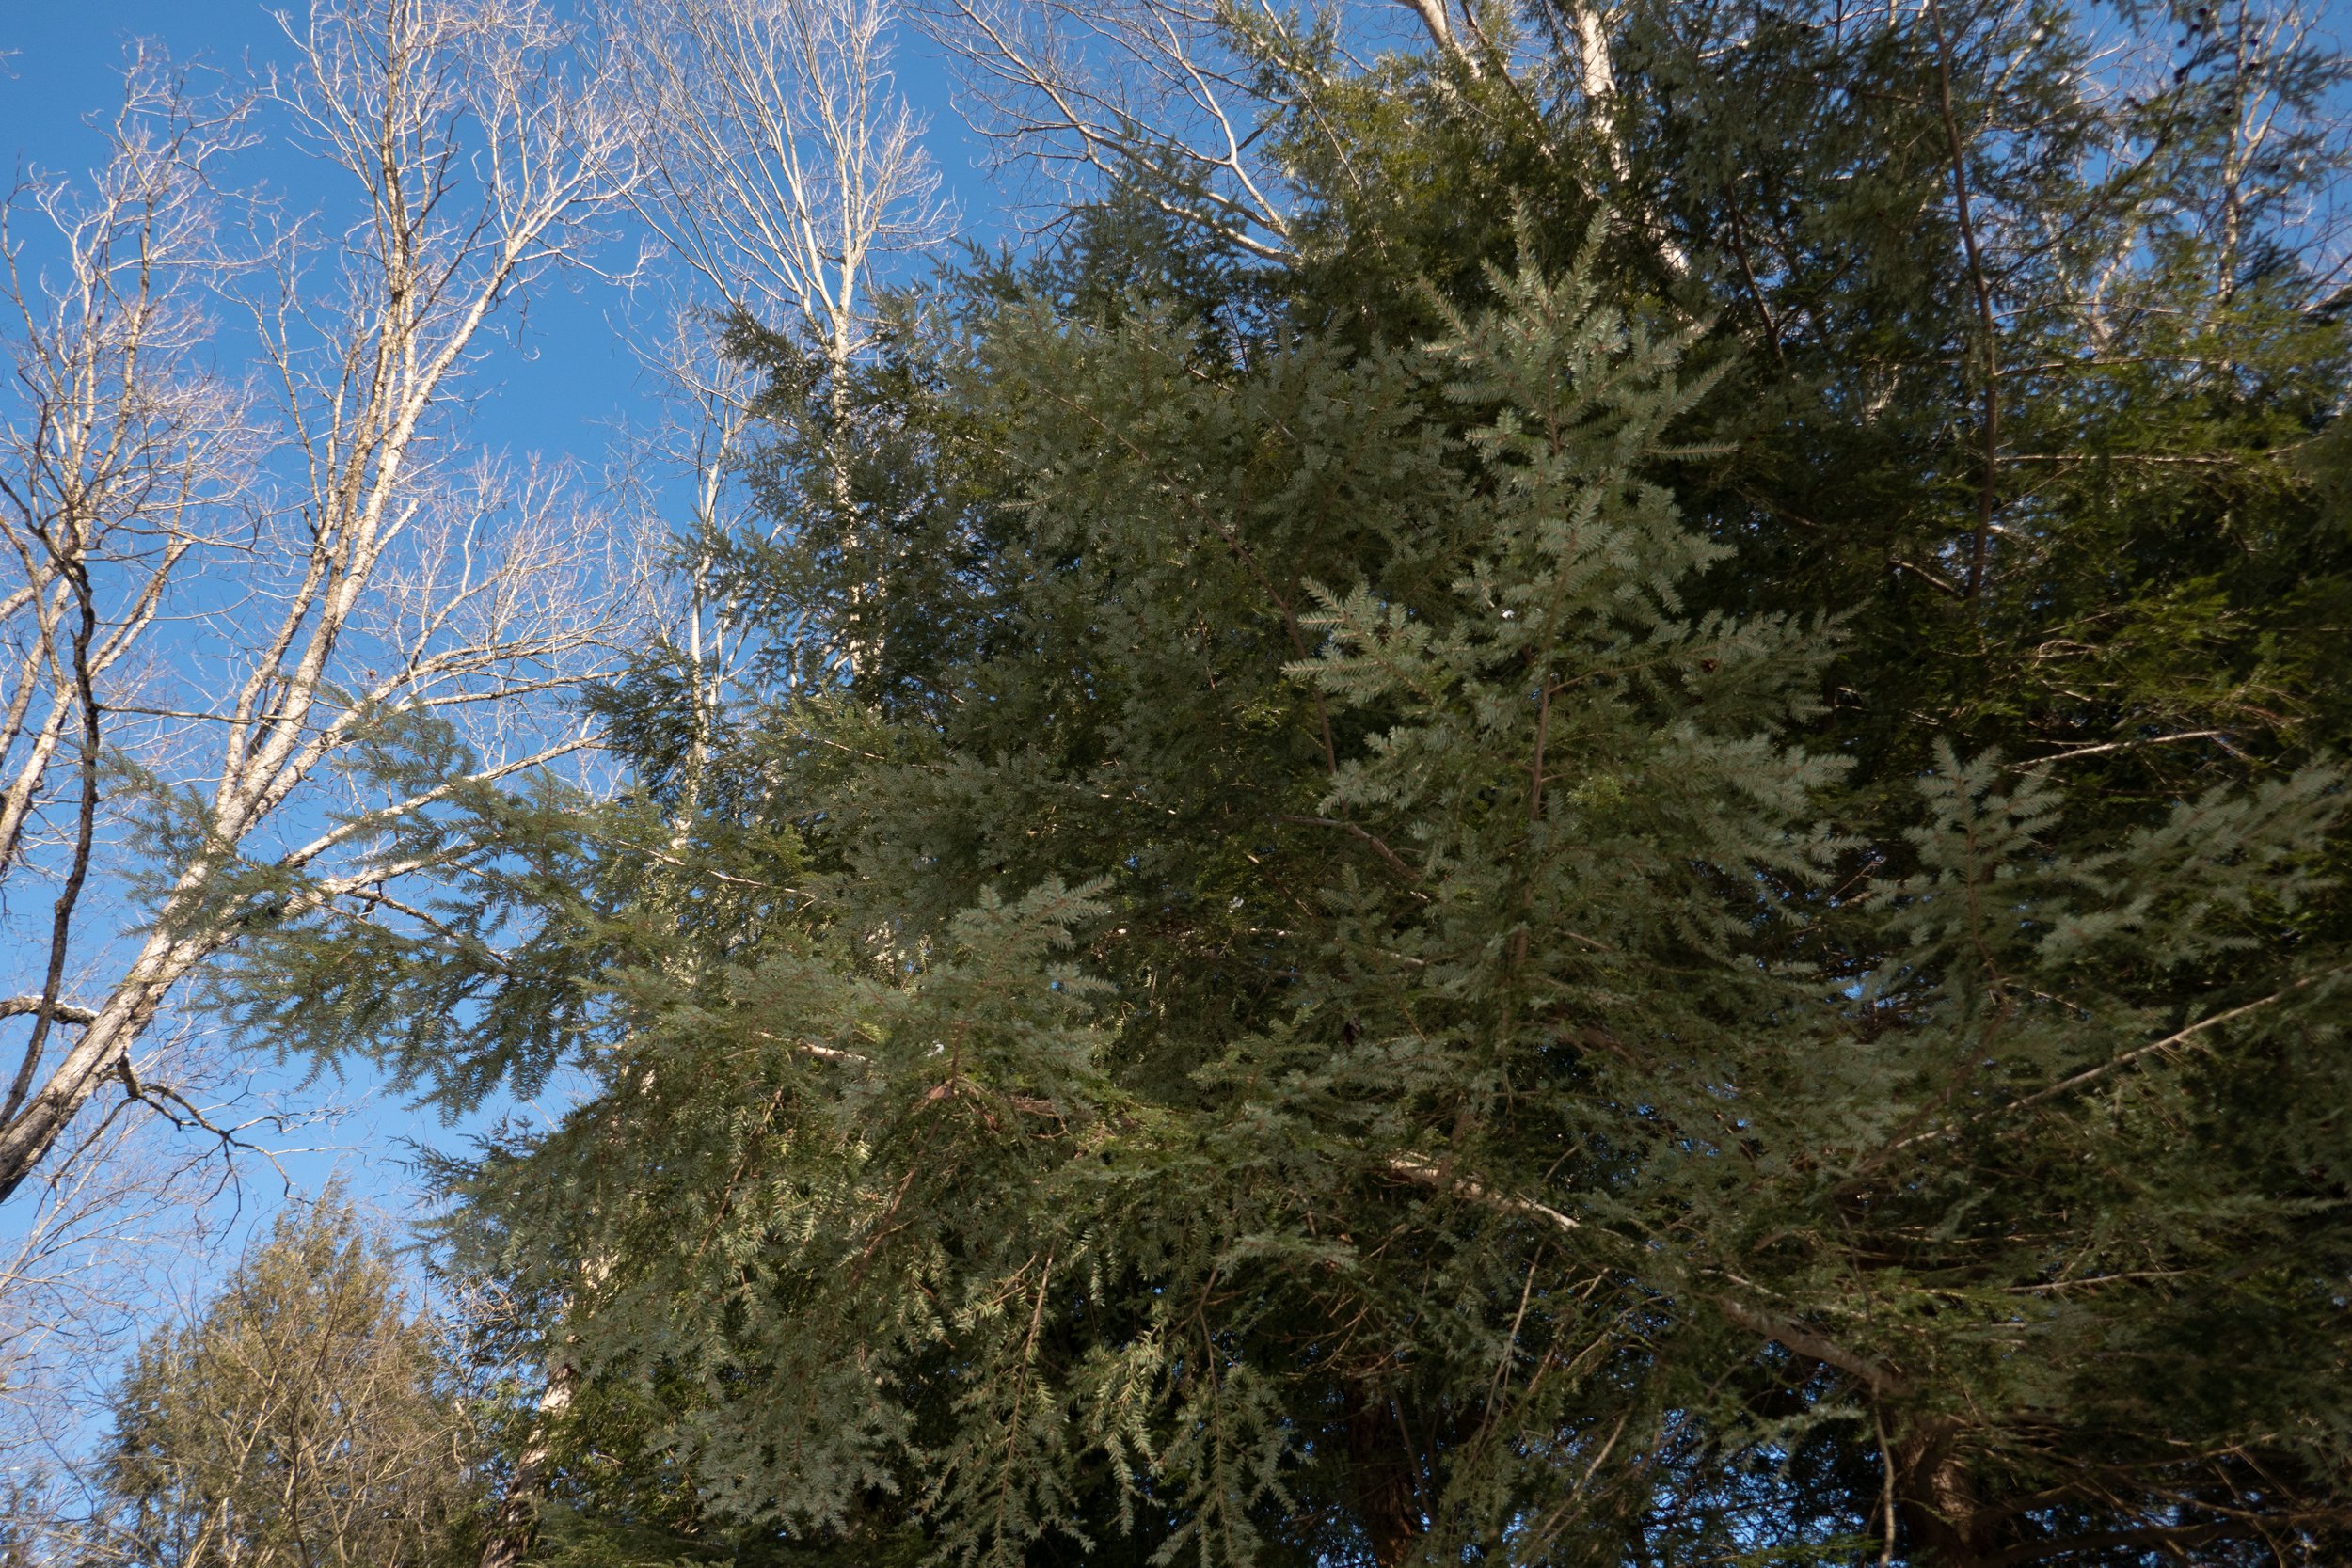  A large hemlock tree with hardwood swayed in the wind. 